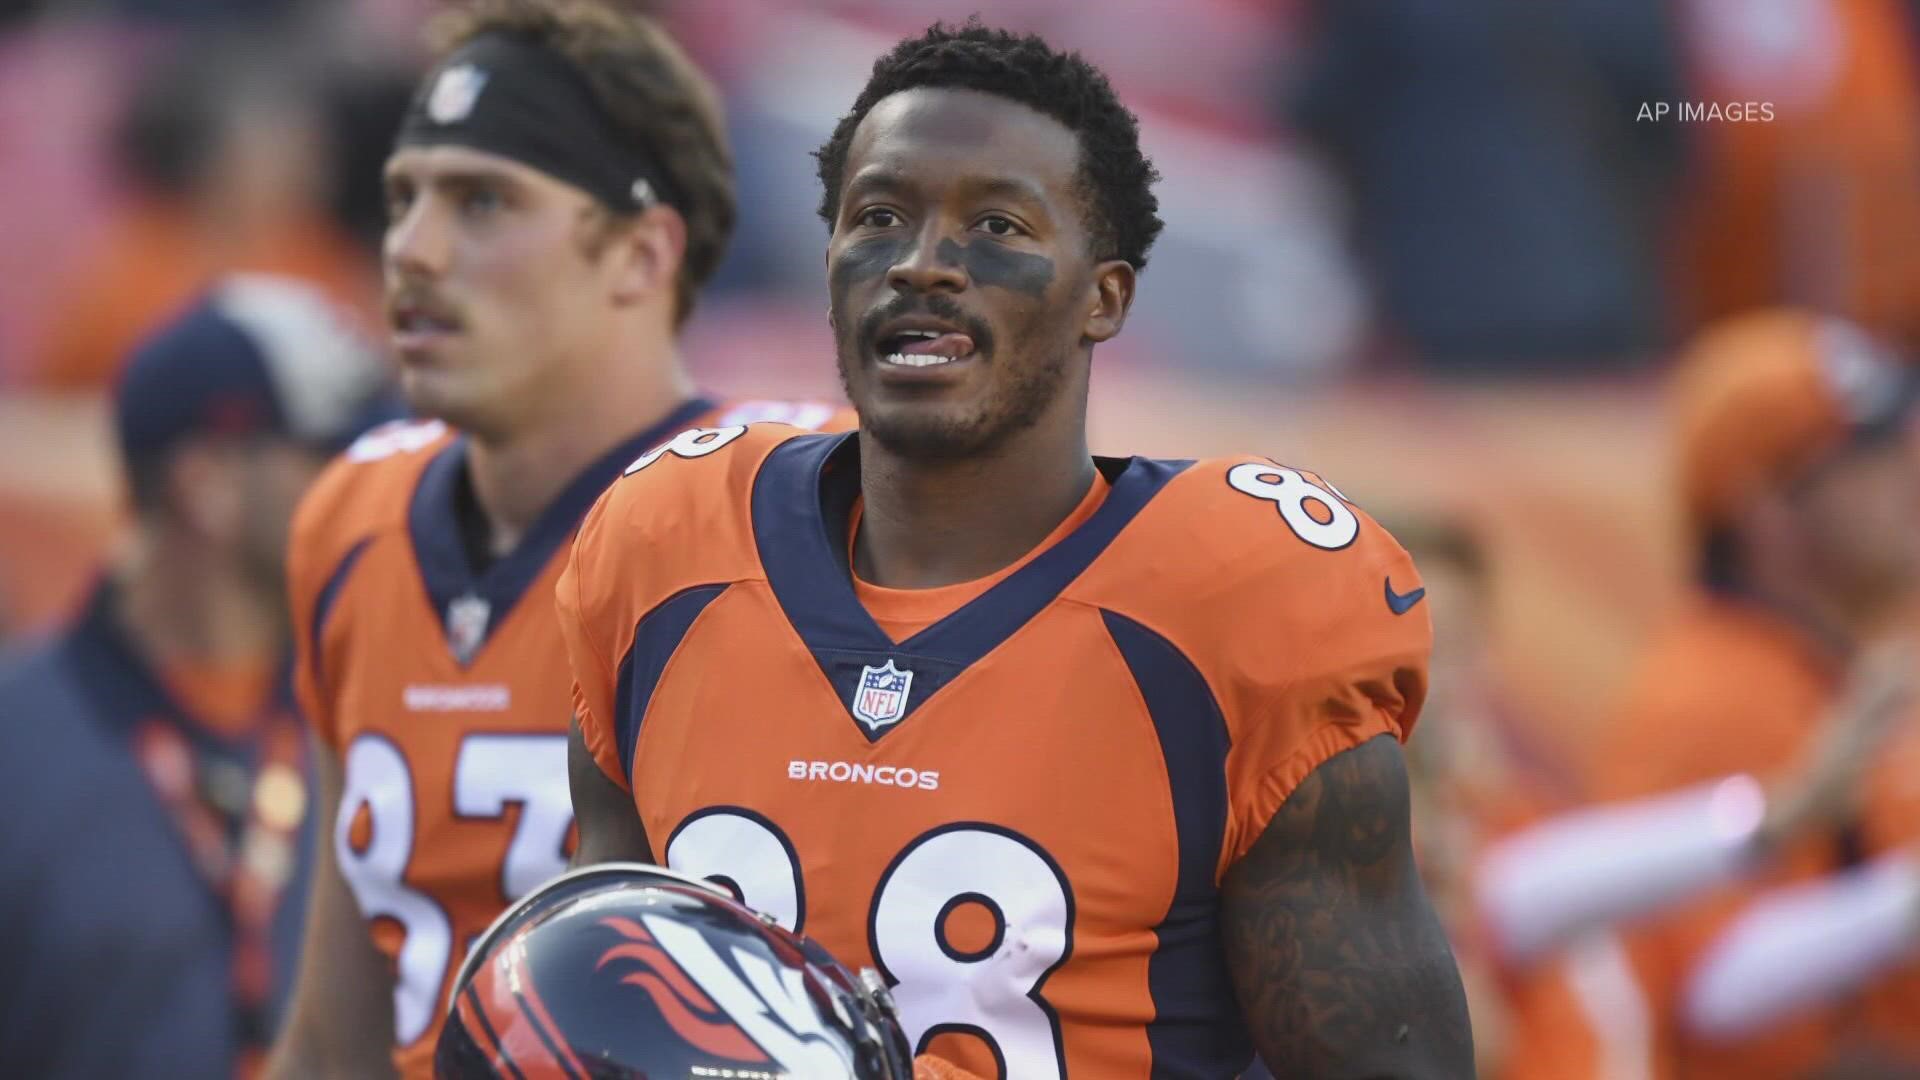 Former Denver Broncos wide receiver Demaryius Thomas has been posthumously diagnosed with Stage 2 CTE.